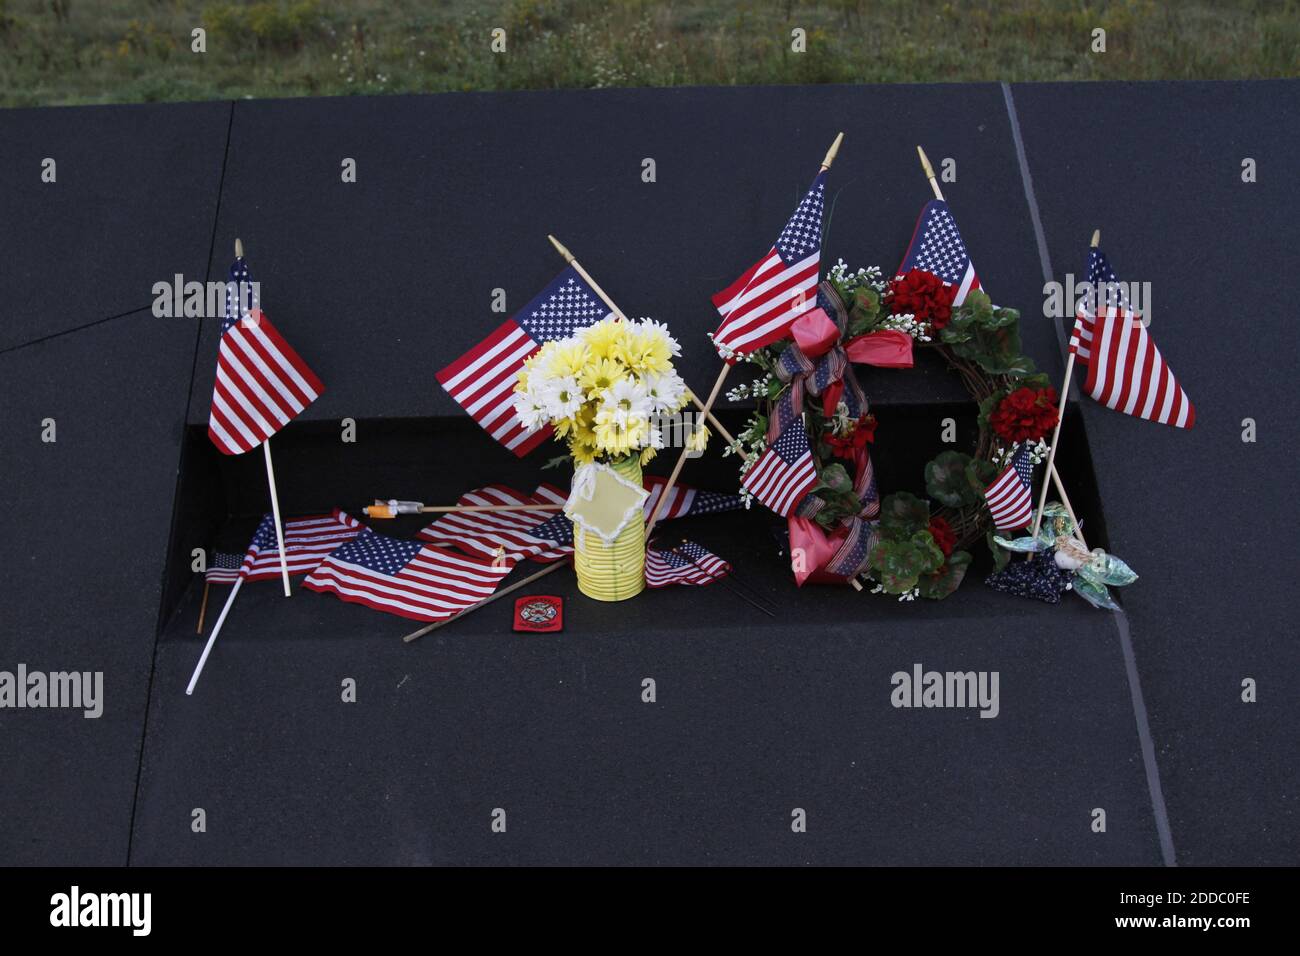 NO FILM, NO VIDEO, NO TV, NO DOCUMENTARY - Flags and tributes are left on the wall on the tenth anniversary of the 9/11 attacks at the new FL93 memorial on Sunday, September 11, 2011 in Shanksville, Pennsylvania. Photo by Laurence Kesterson/Philadelphia Inquirer/MCT/ABACAPRESS.COM Stock Photo